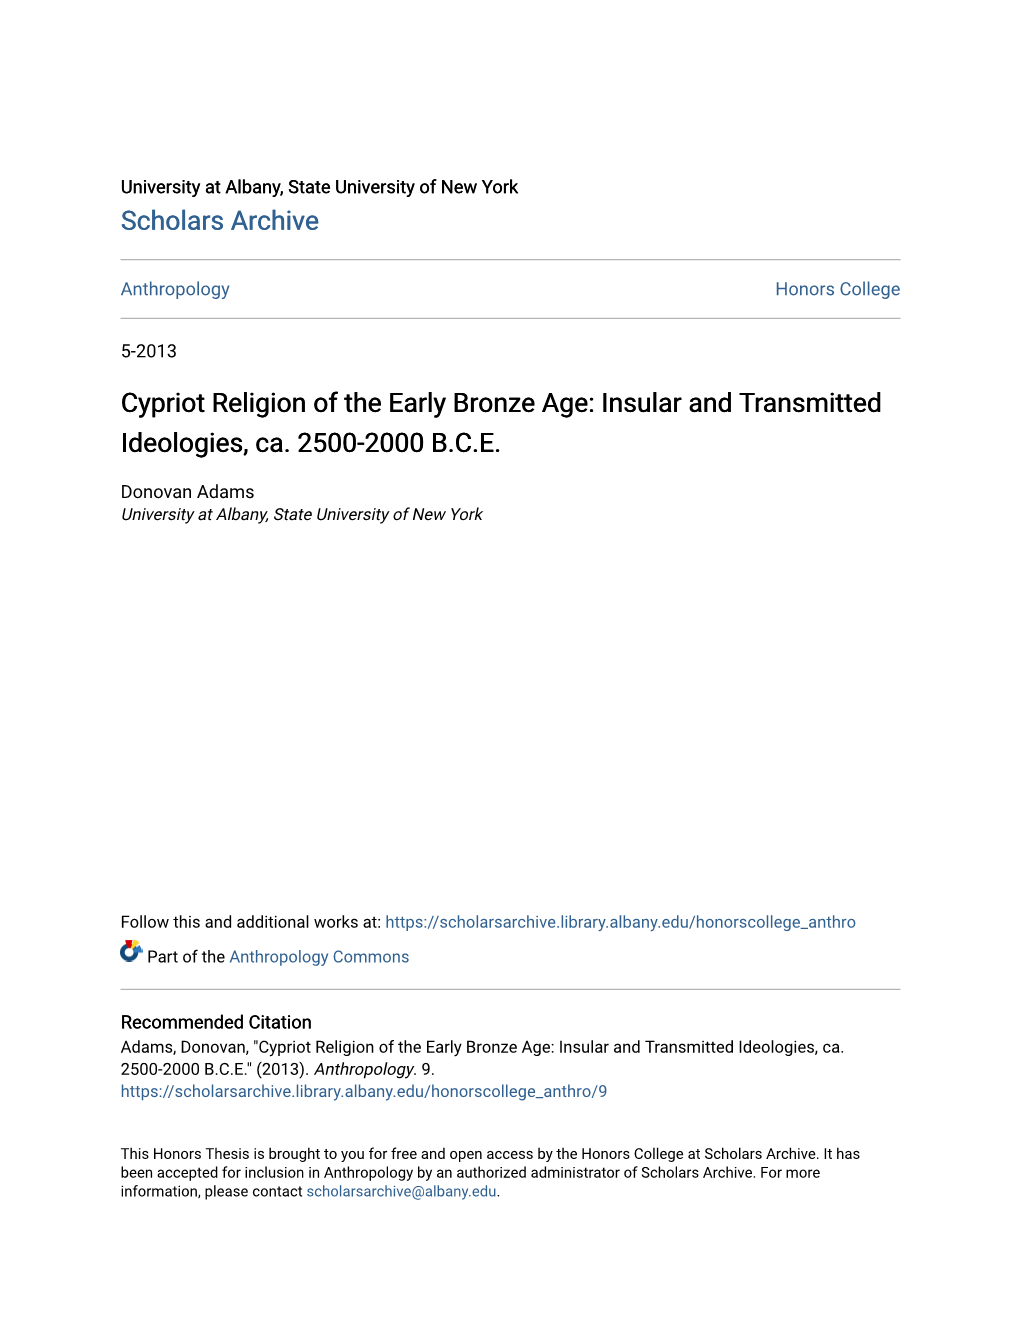 Cypriot Religion of the Early Bronze Age: Insular and Transmitted Ideologies, Ca